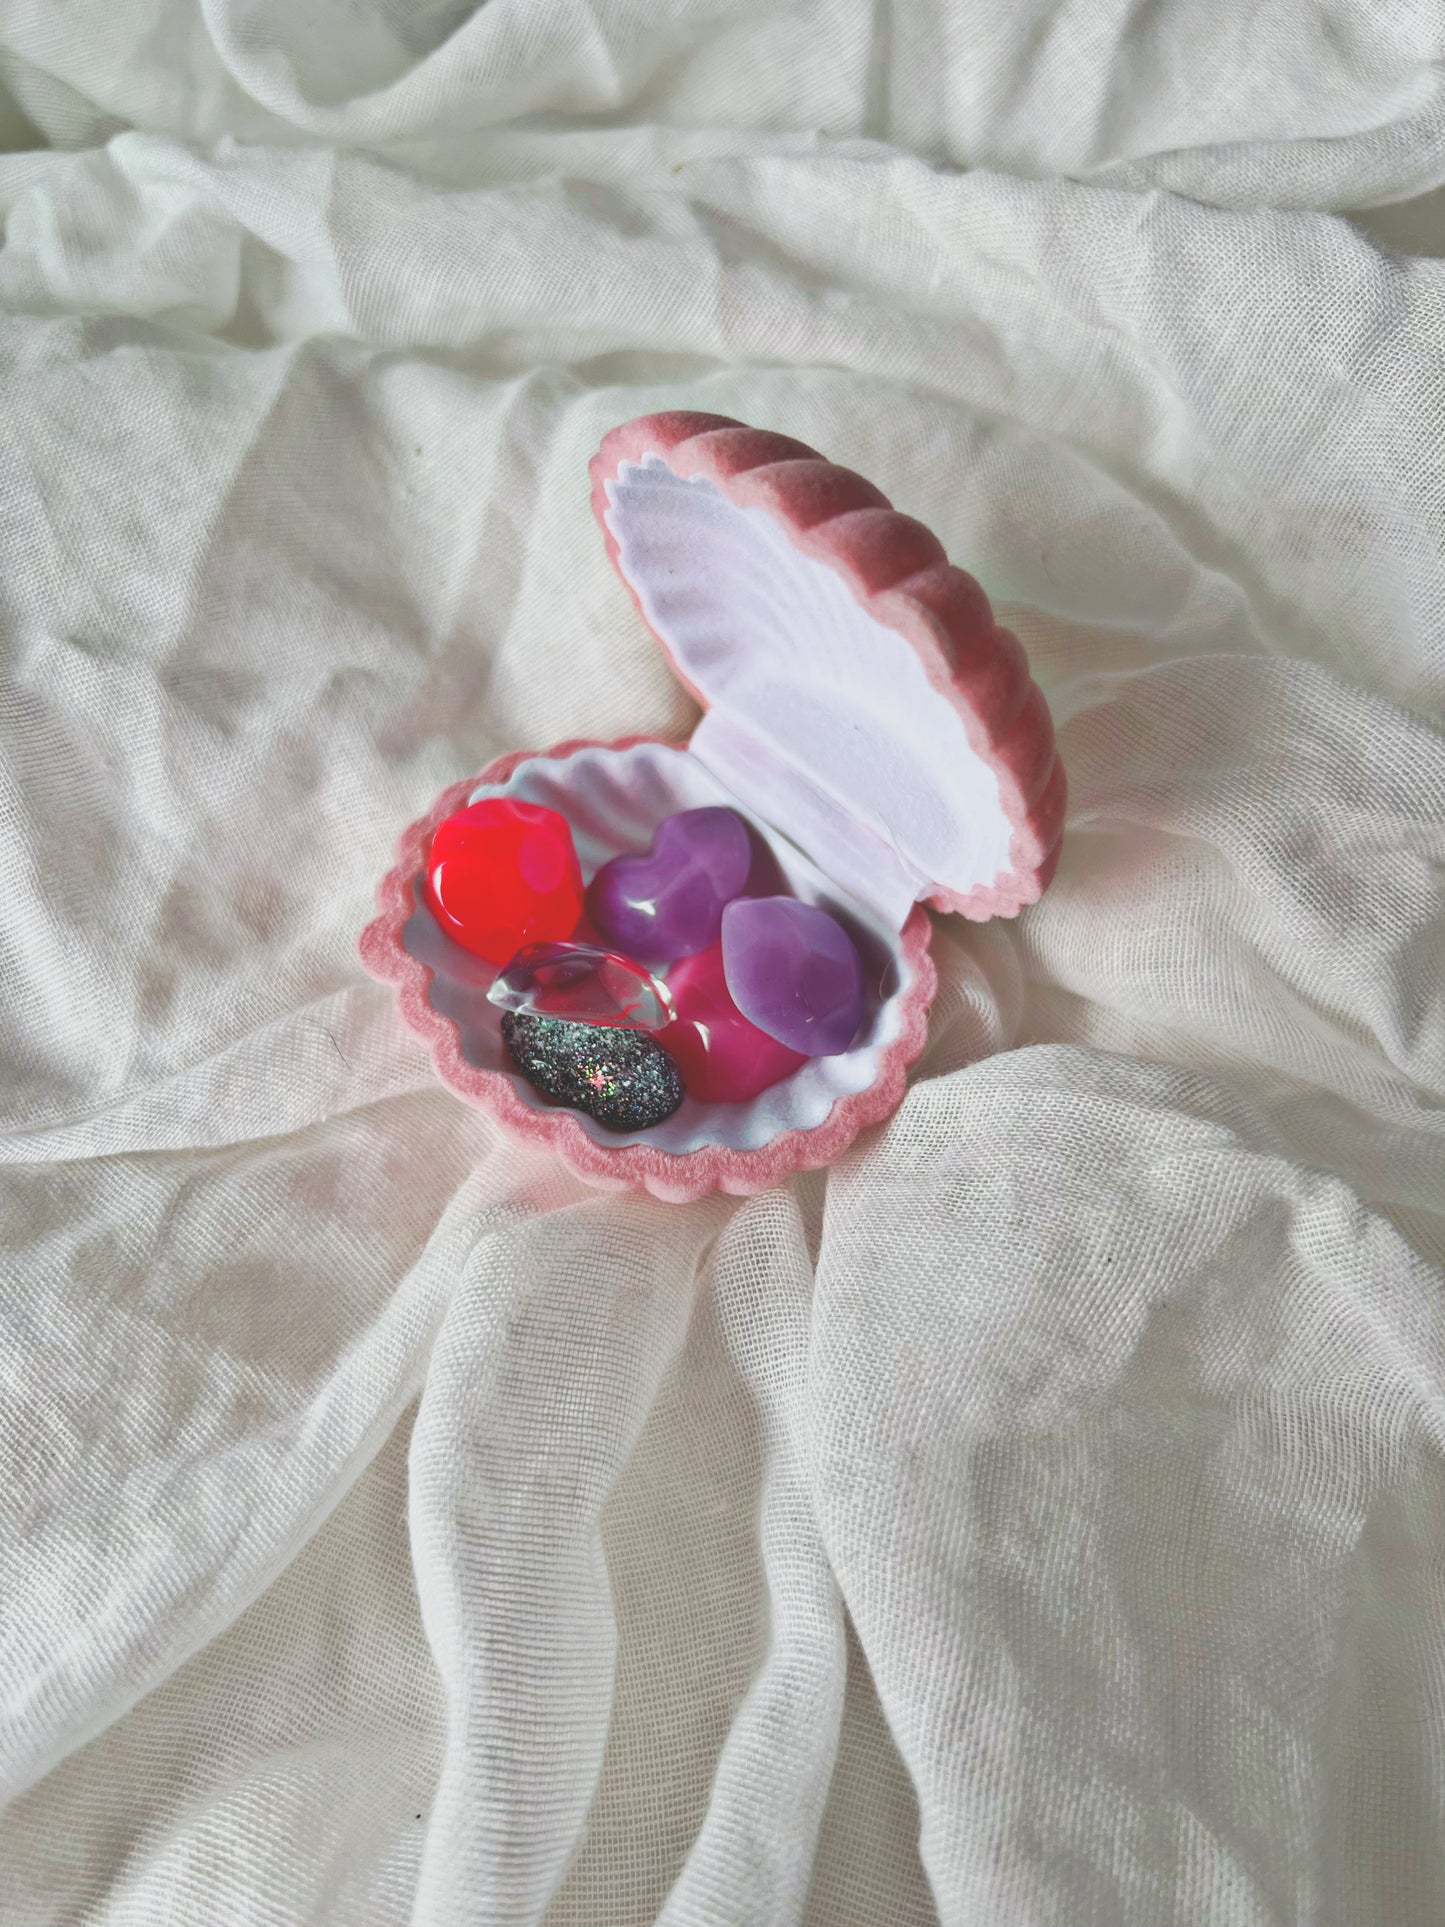 The pink mermaid shell